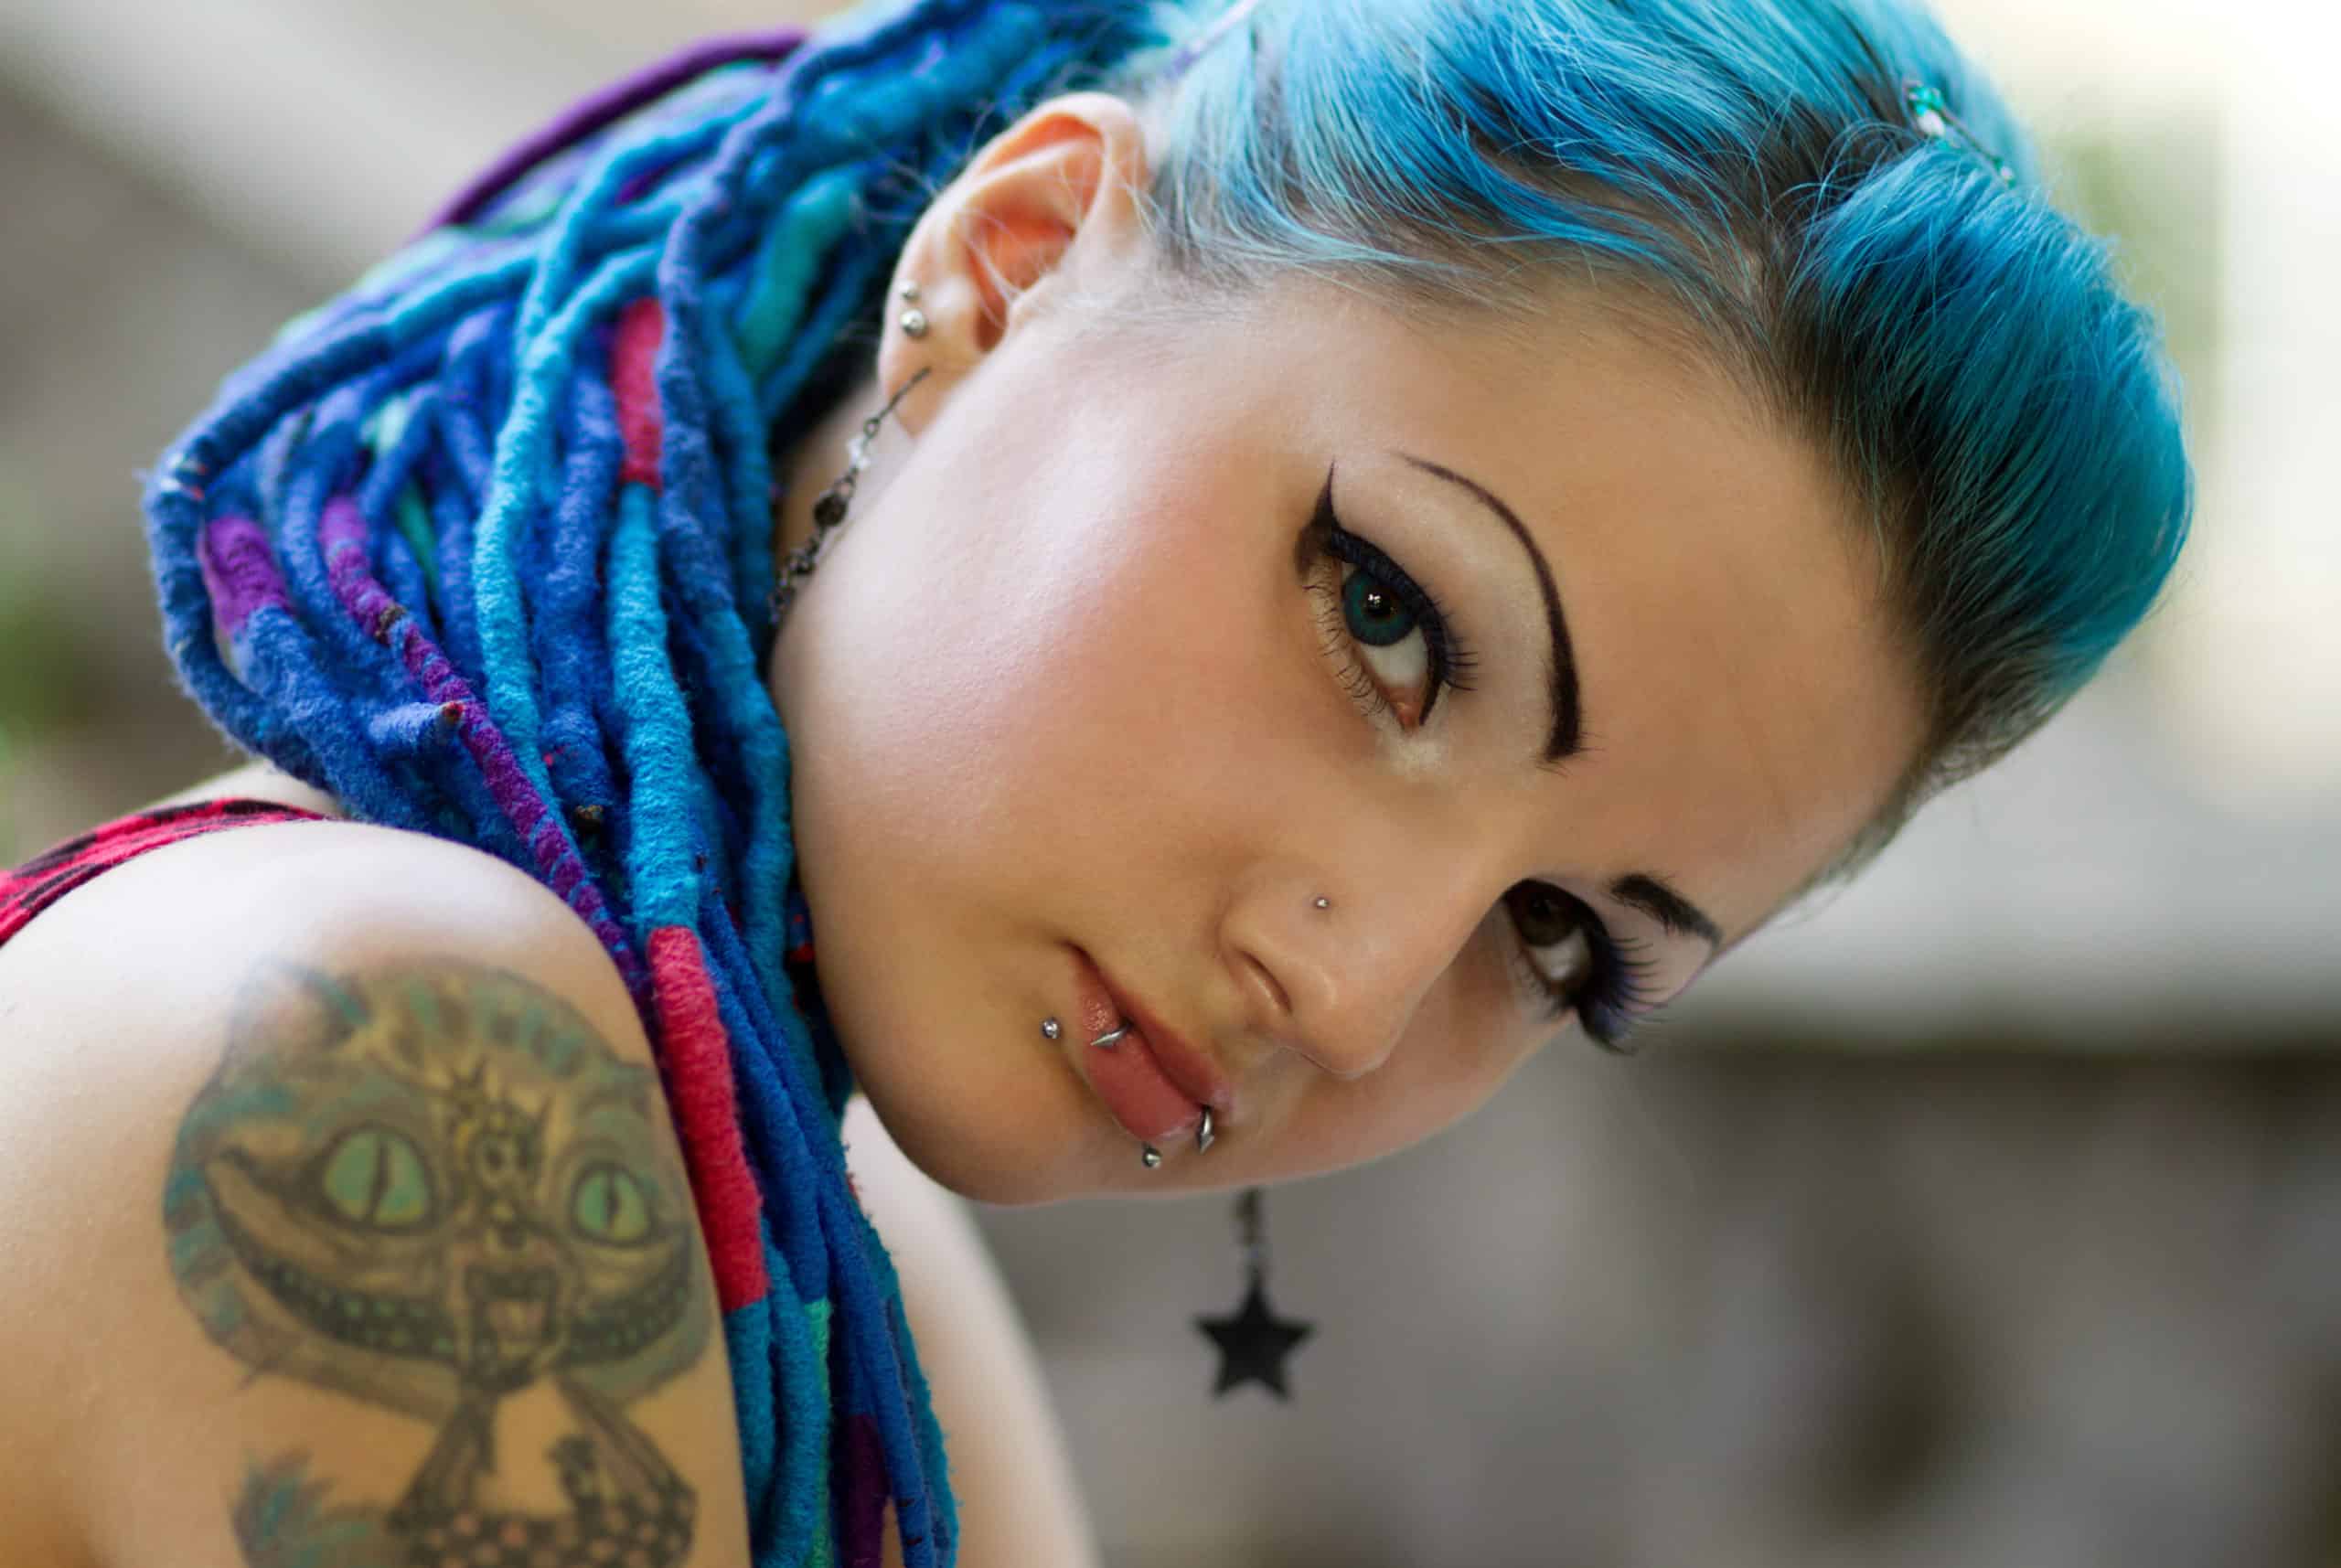 Tattoos and Piercings for Teens? Check safety first